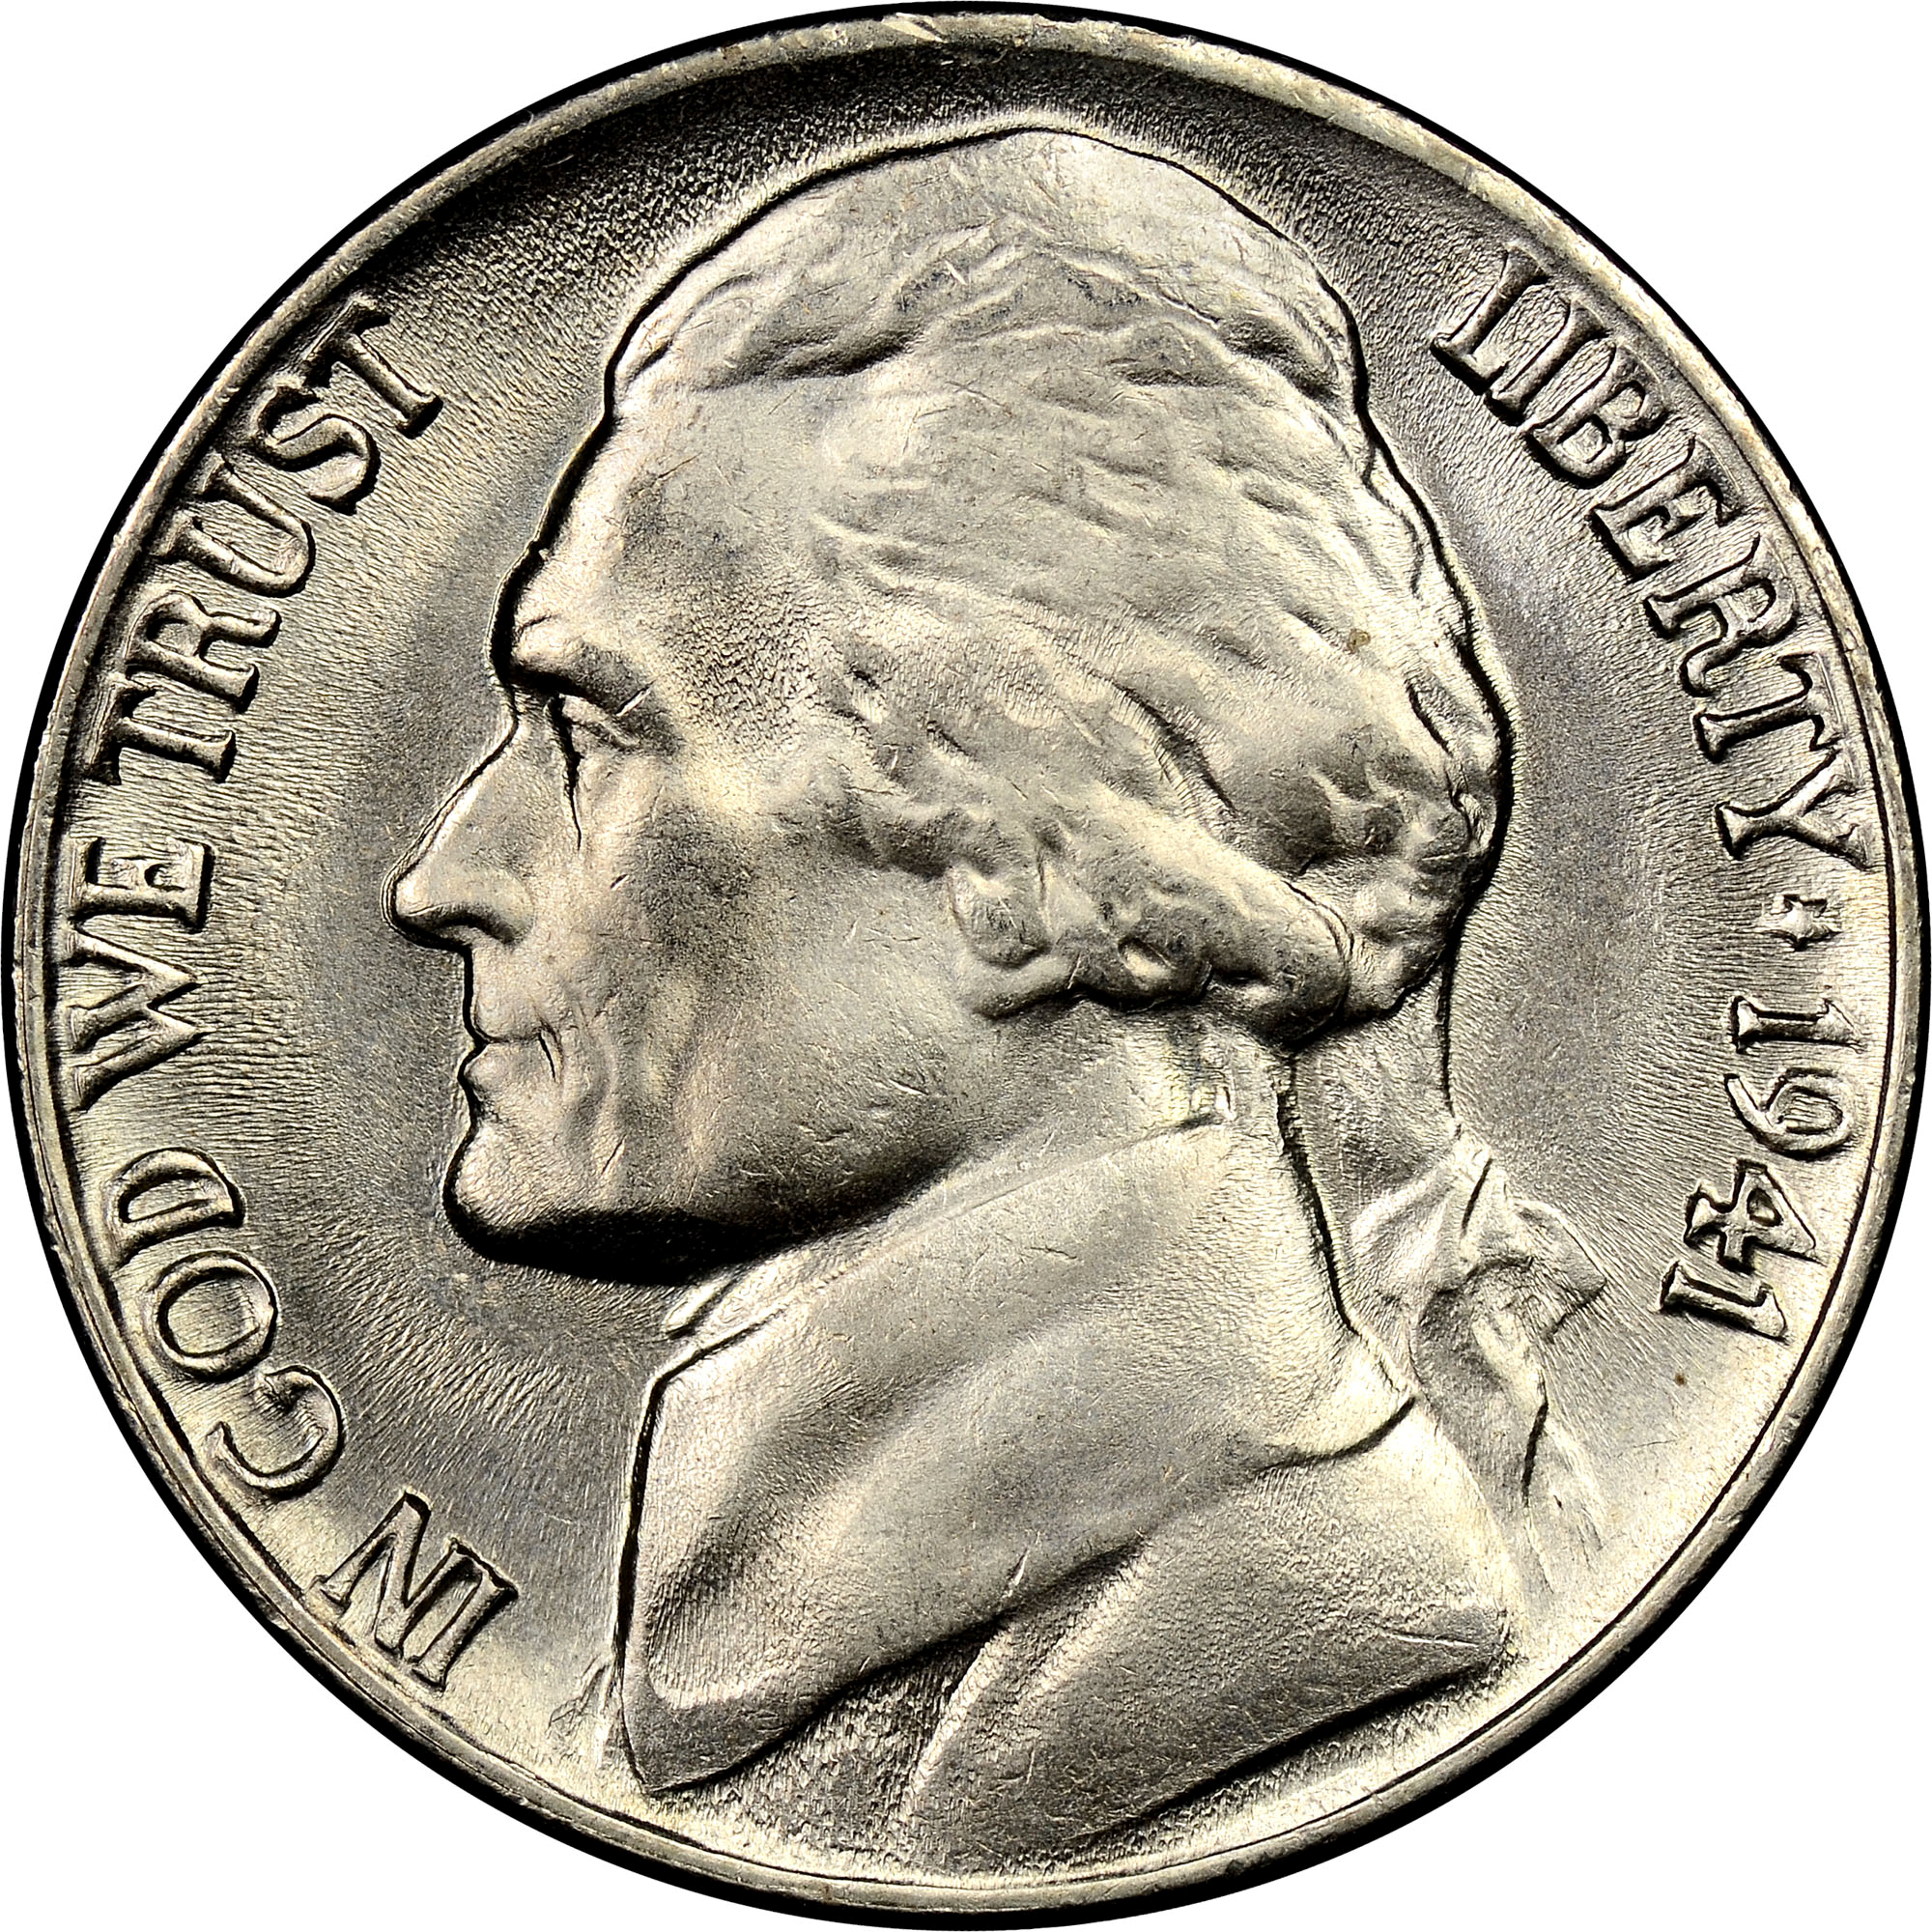 What Is the 1941 Jefferson Nickel Made Of